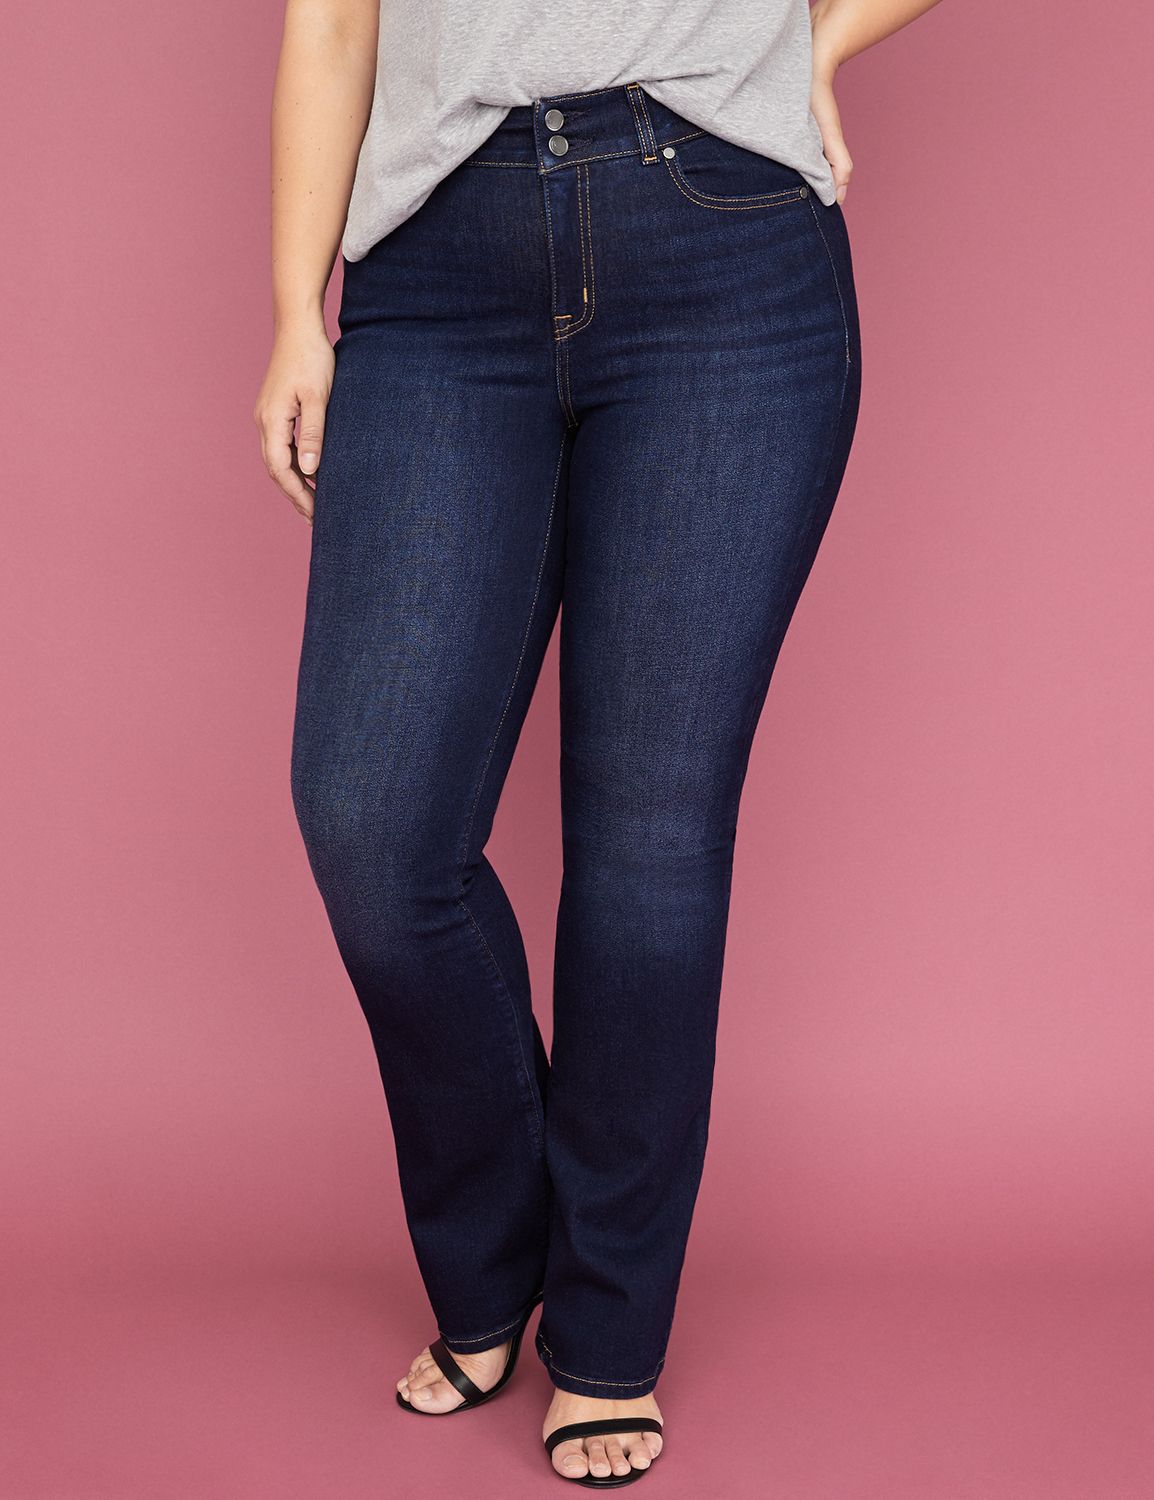 Plus Size Tall Jeans for Women